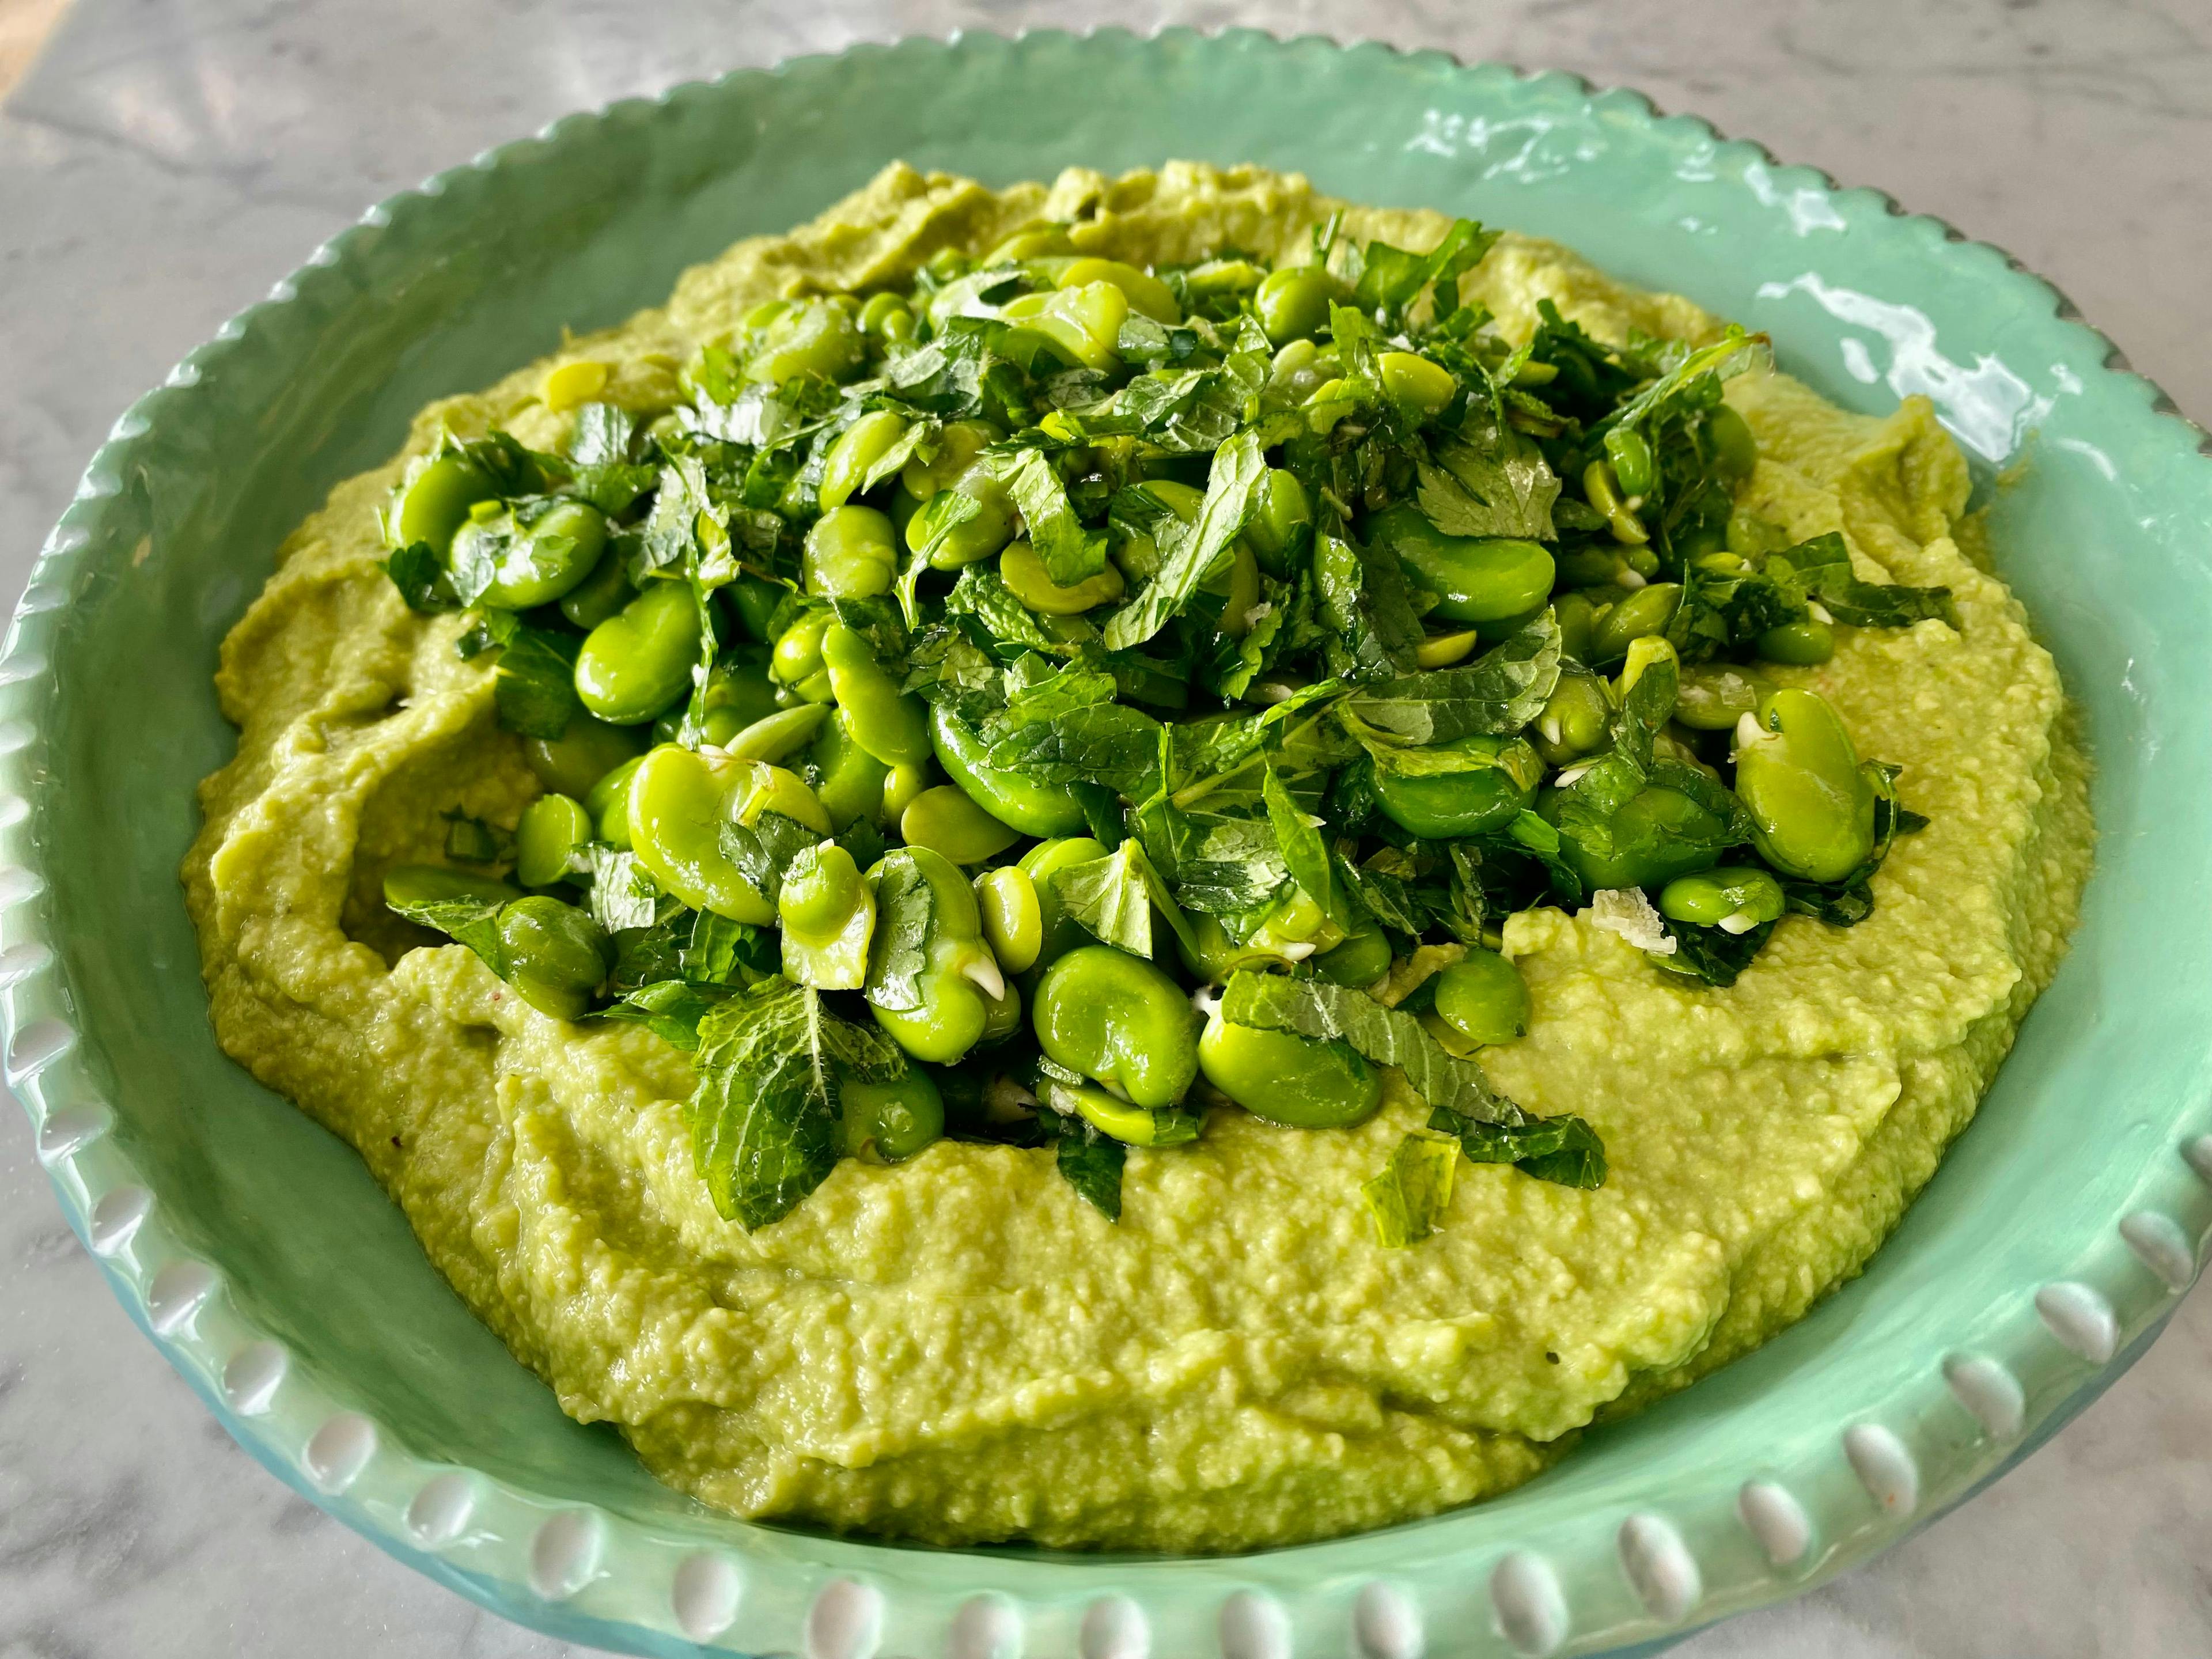 Smashed avocado with shelled broad beans